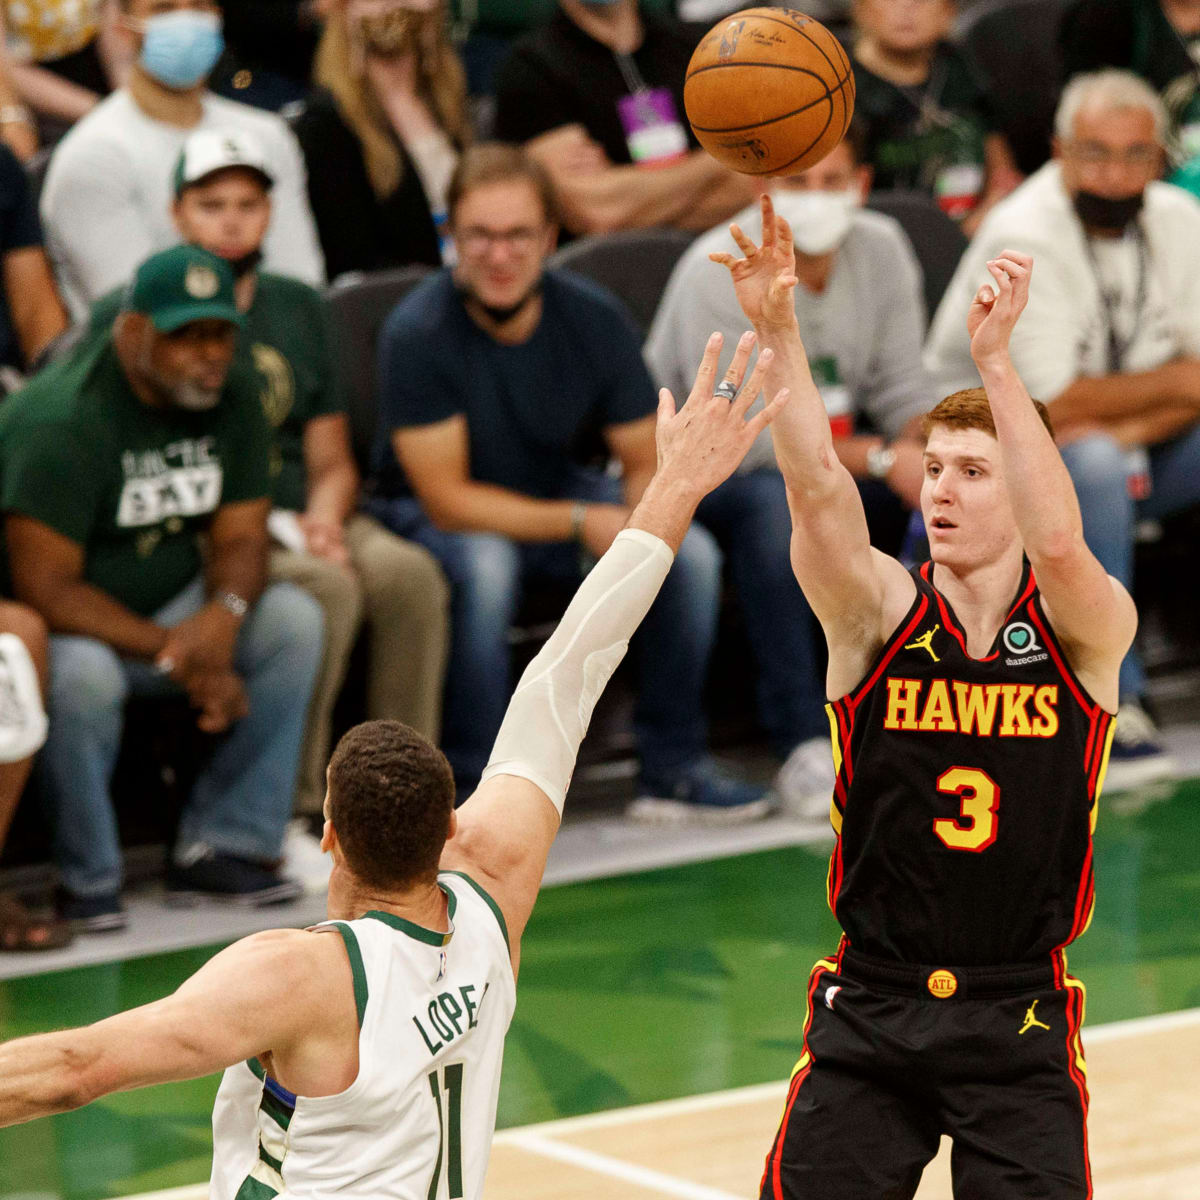 Report: Kevin Huerter has been invited to participate in the 3